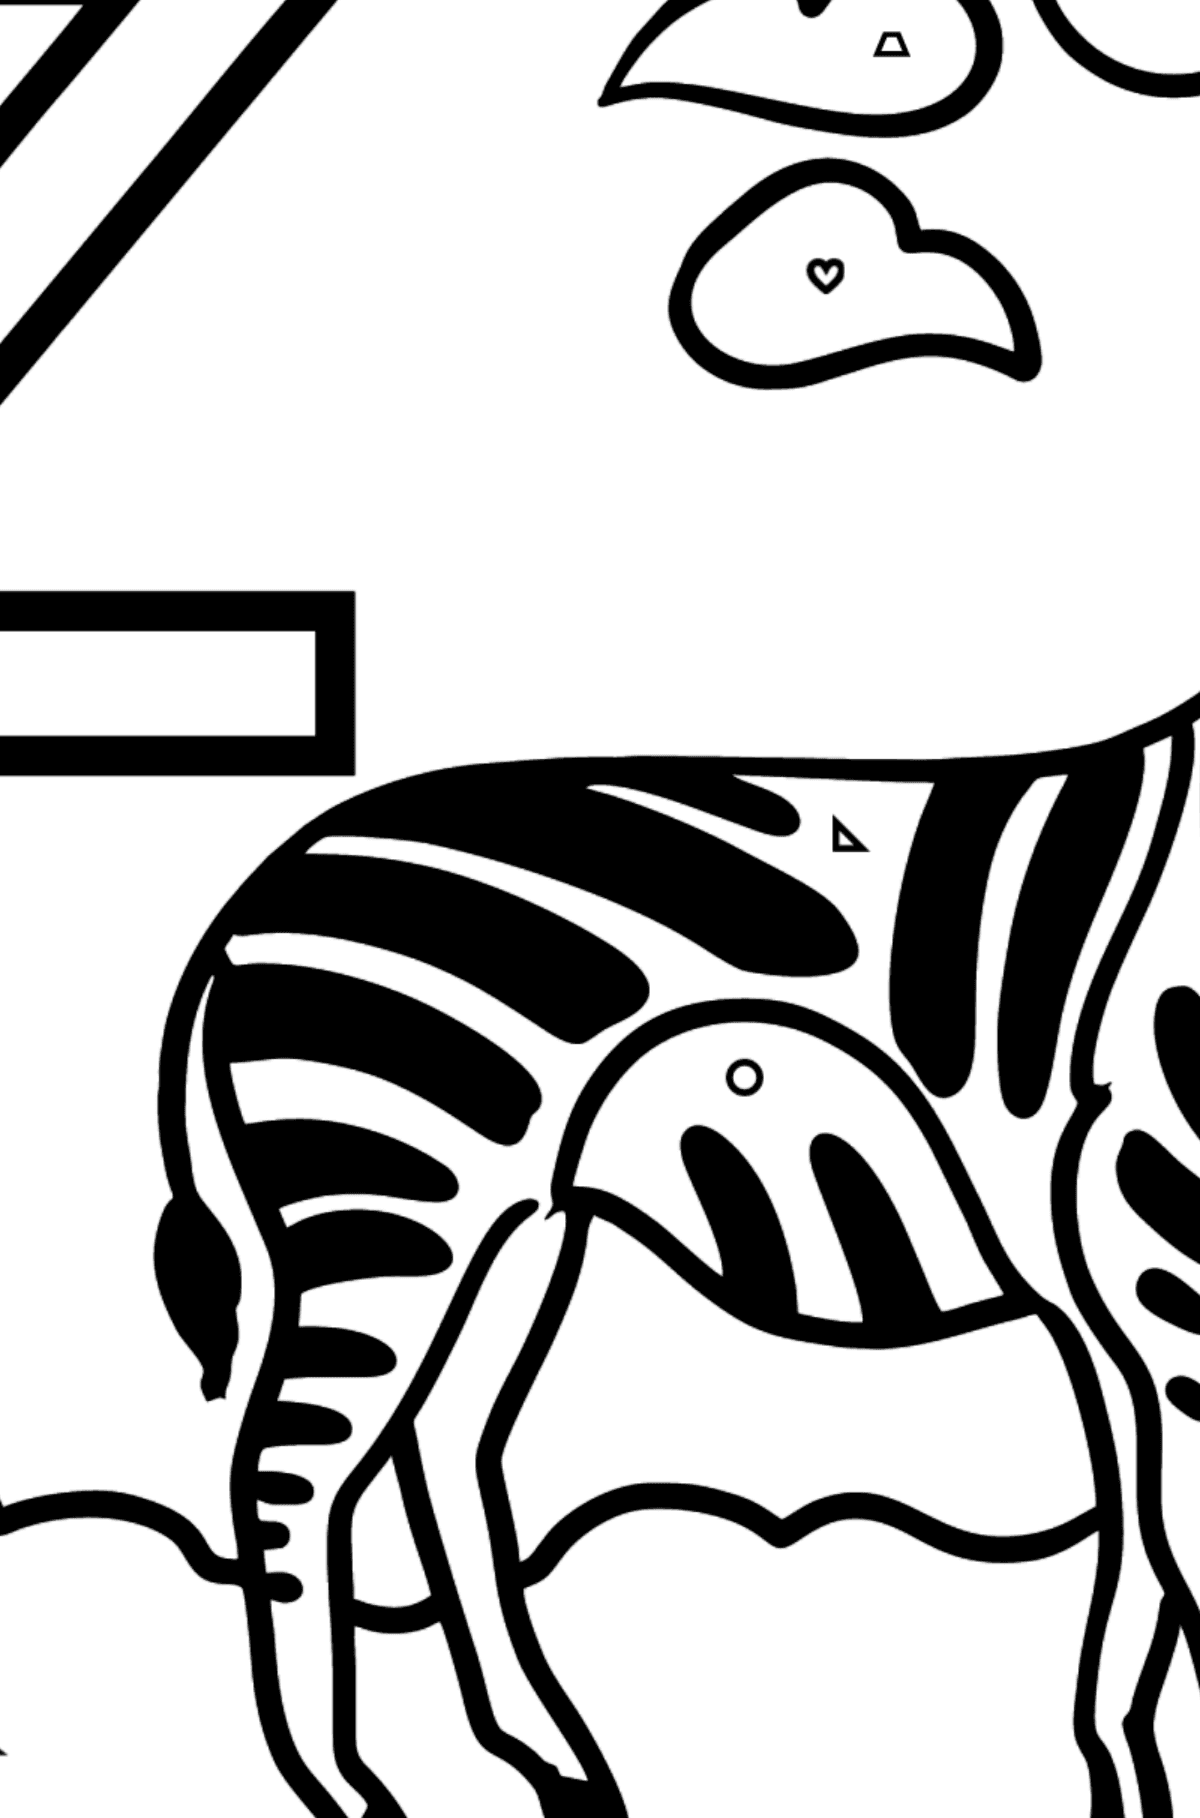 English Letter Z coloring pages - ZEBRA - Coloring by Geometric Shapes for Kids